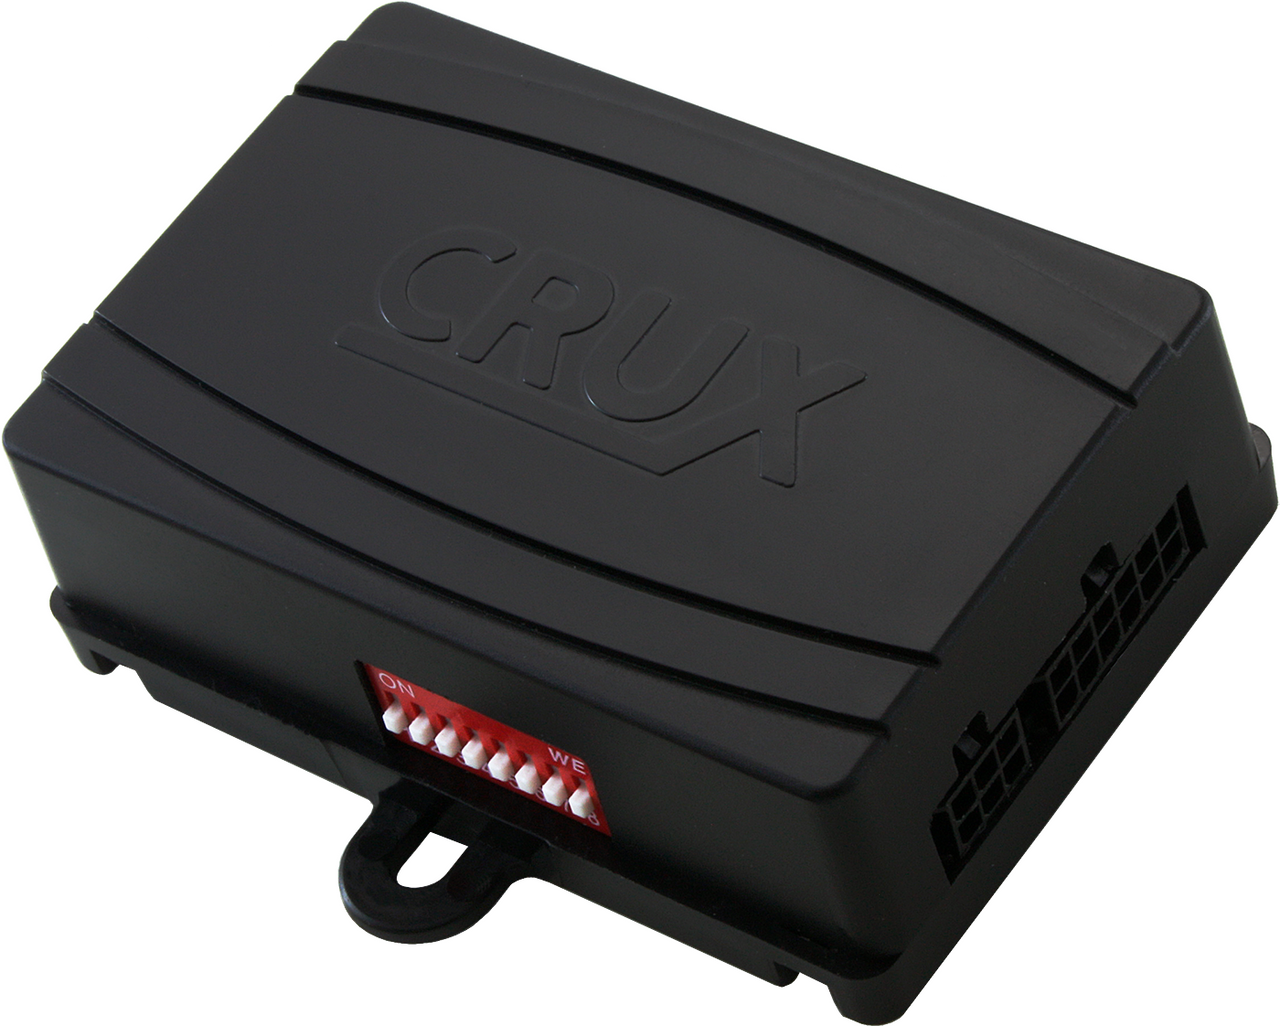 Crux RFM-TUN Multi View Integration Interface with A/V Input and Side Mirror Mounted Cameras for Toyota Tundra